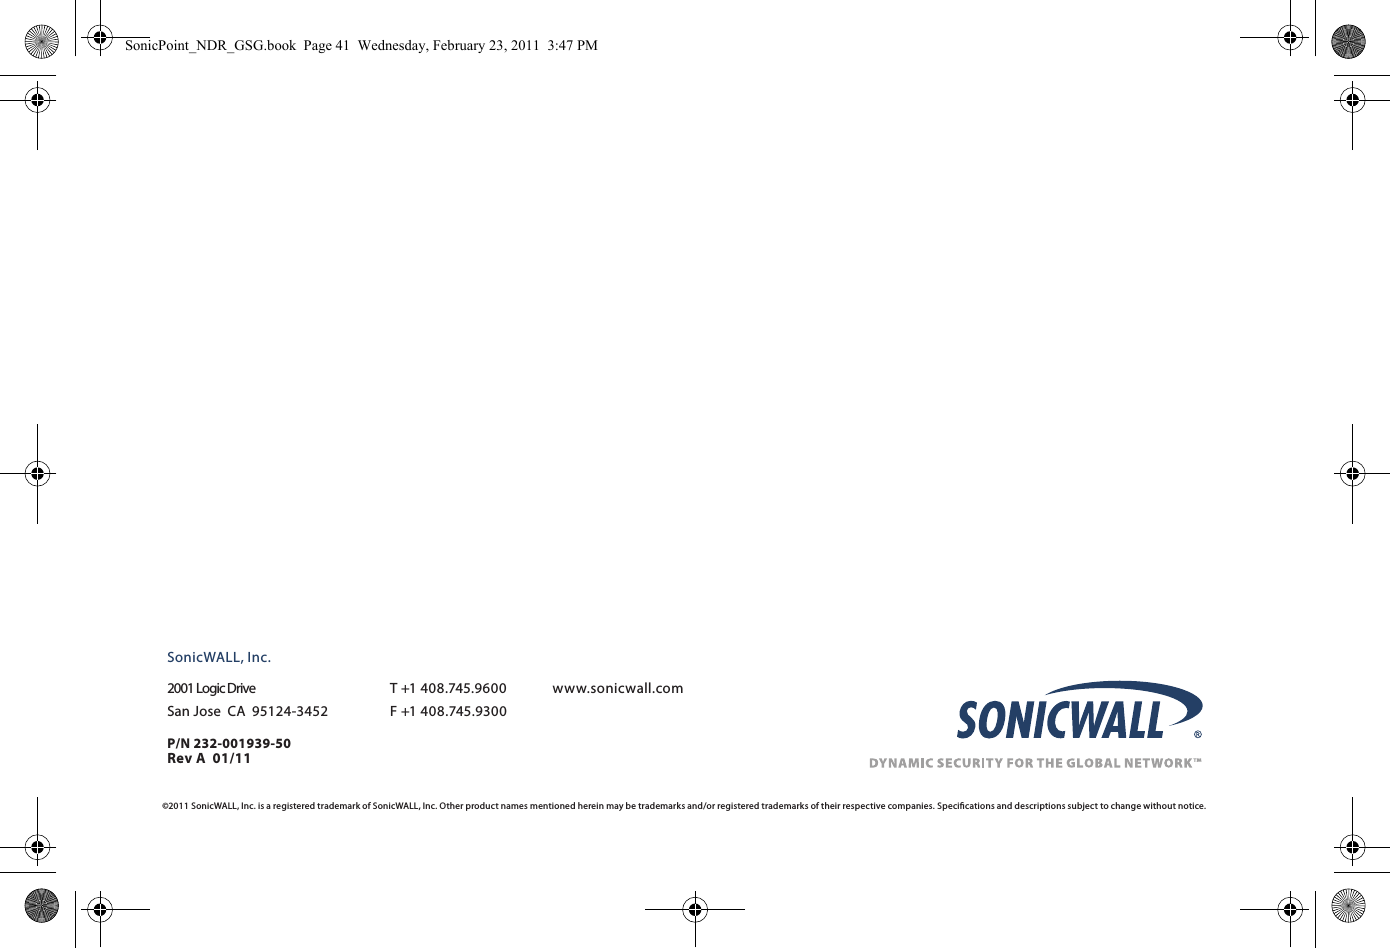 SonicWALL, Inc.2001 Logic Drive   T +1 40 8.745.960 0  w ww. sonicw all.co m   San Jose  CA  95124-3452   F +1 408.745.9300P/N 232-001939-50Rev A  01/11©2011 SonicWALL, Inc. is a registered trademark of SonicWALL, Inc. Other product names mentioned herein may be trademarks and/or registered trademarks of their respective companies. Speciﬁcations and descriptions subject to change without notice. SonicPoint_NDR_GSG.book  Page 41  Wednesday, February 23, 2011  3:47 PM